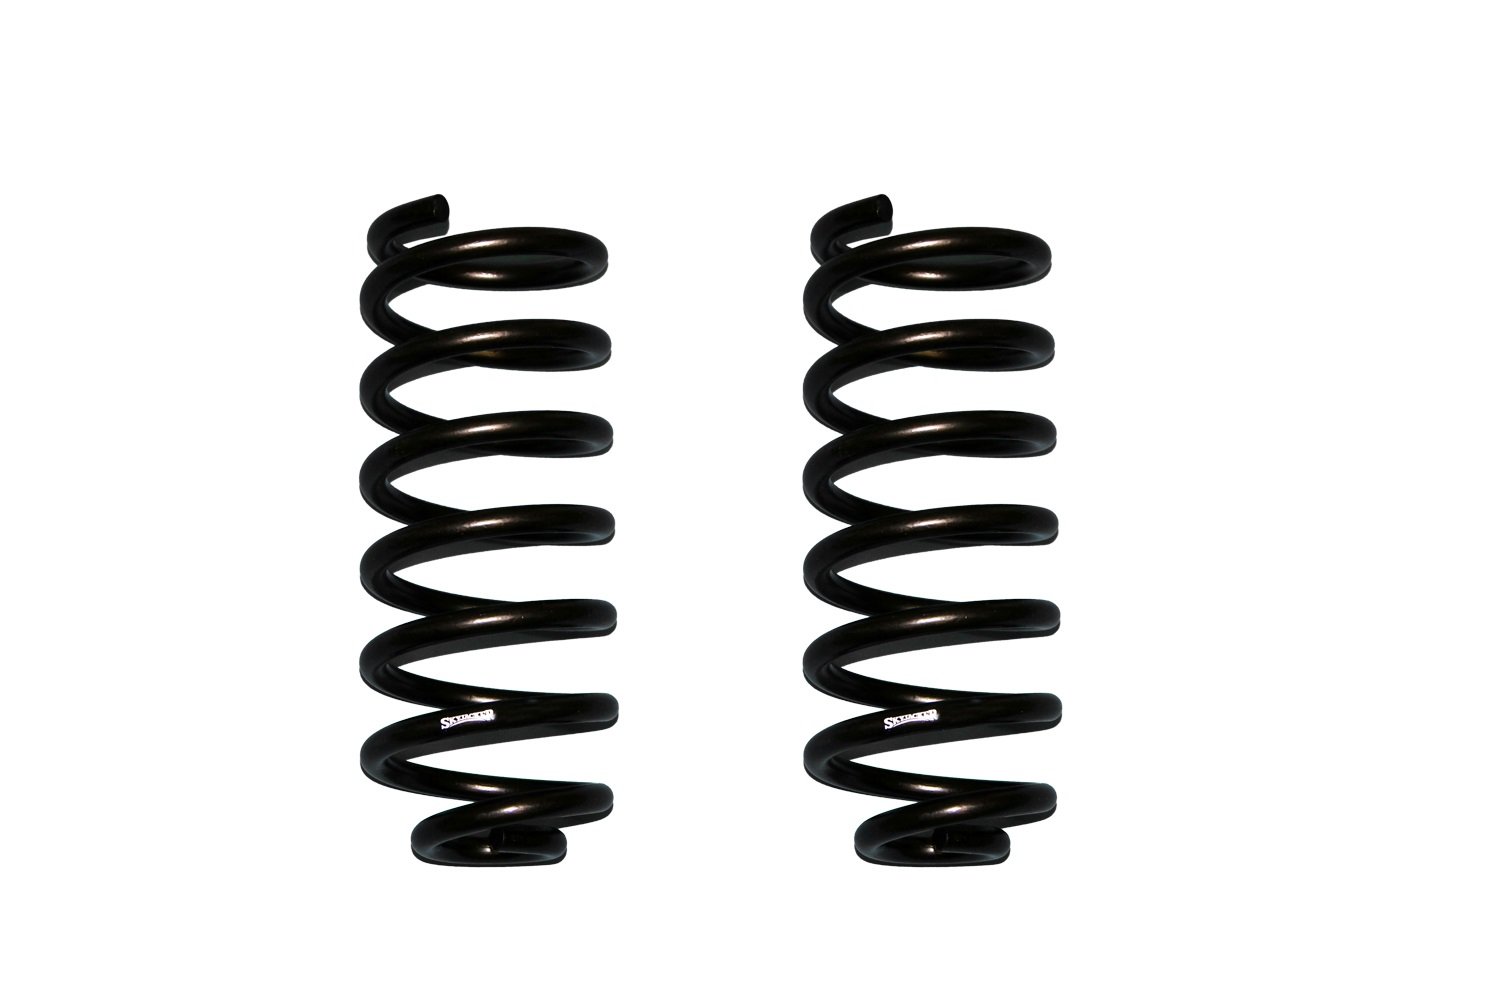 JK20RSR Softride Lift Coil Springs, Lift: 2-2.5 in.